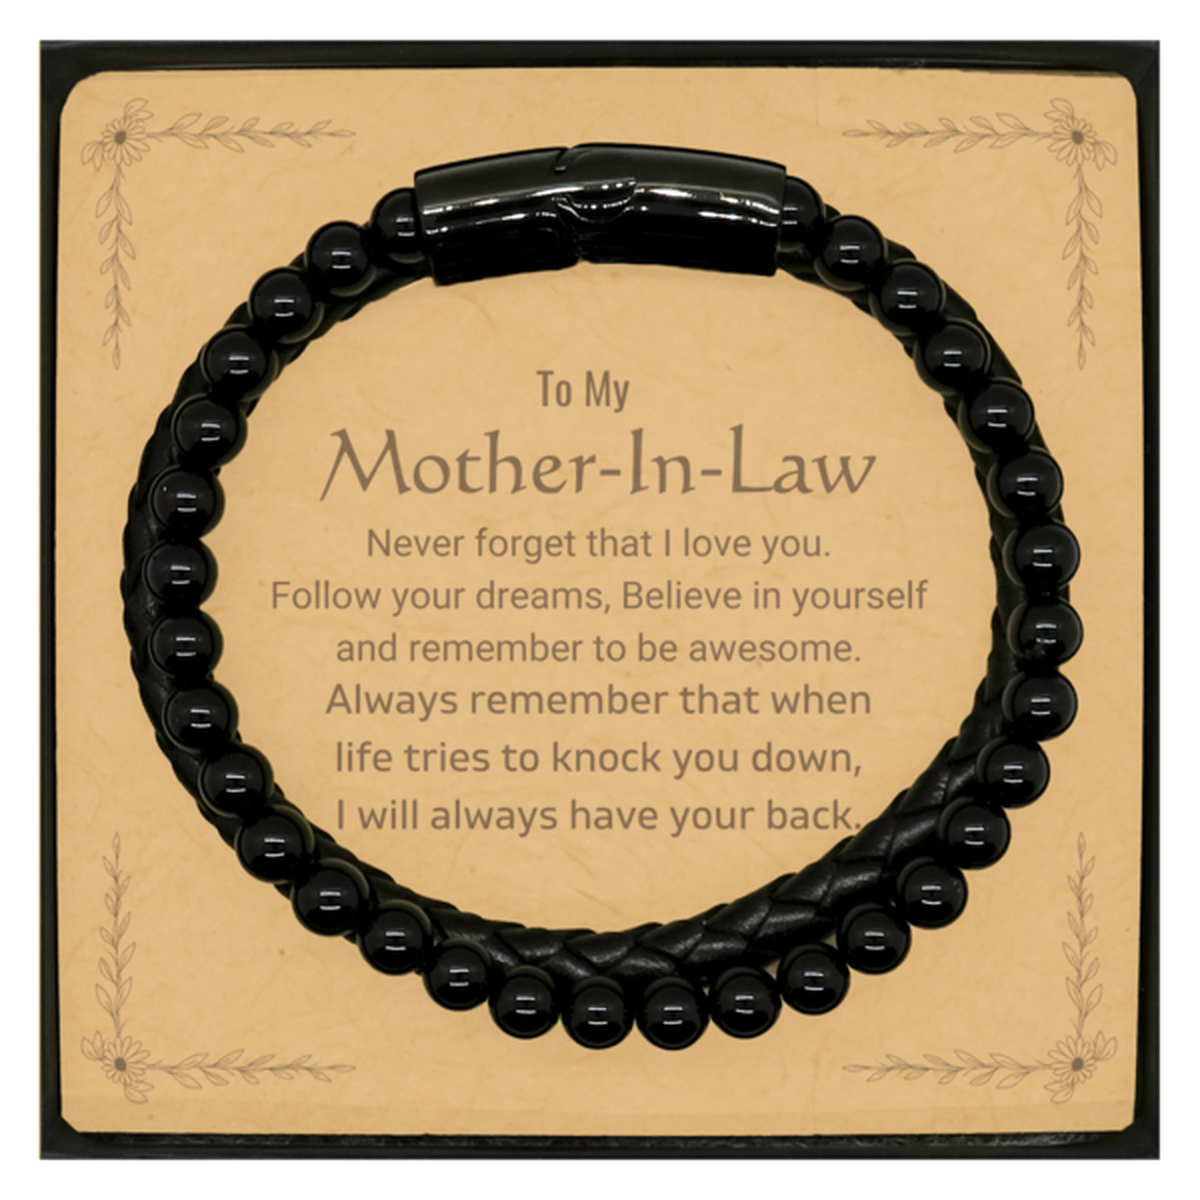 Inspirational Gifts for Mother-In-Law, Follow your dreams, Believe in yourself, Mother-In-Law Stone Leather Bracelets, Birthday Christmas Unique Gifts For Mother-In-Law